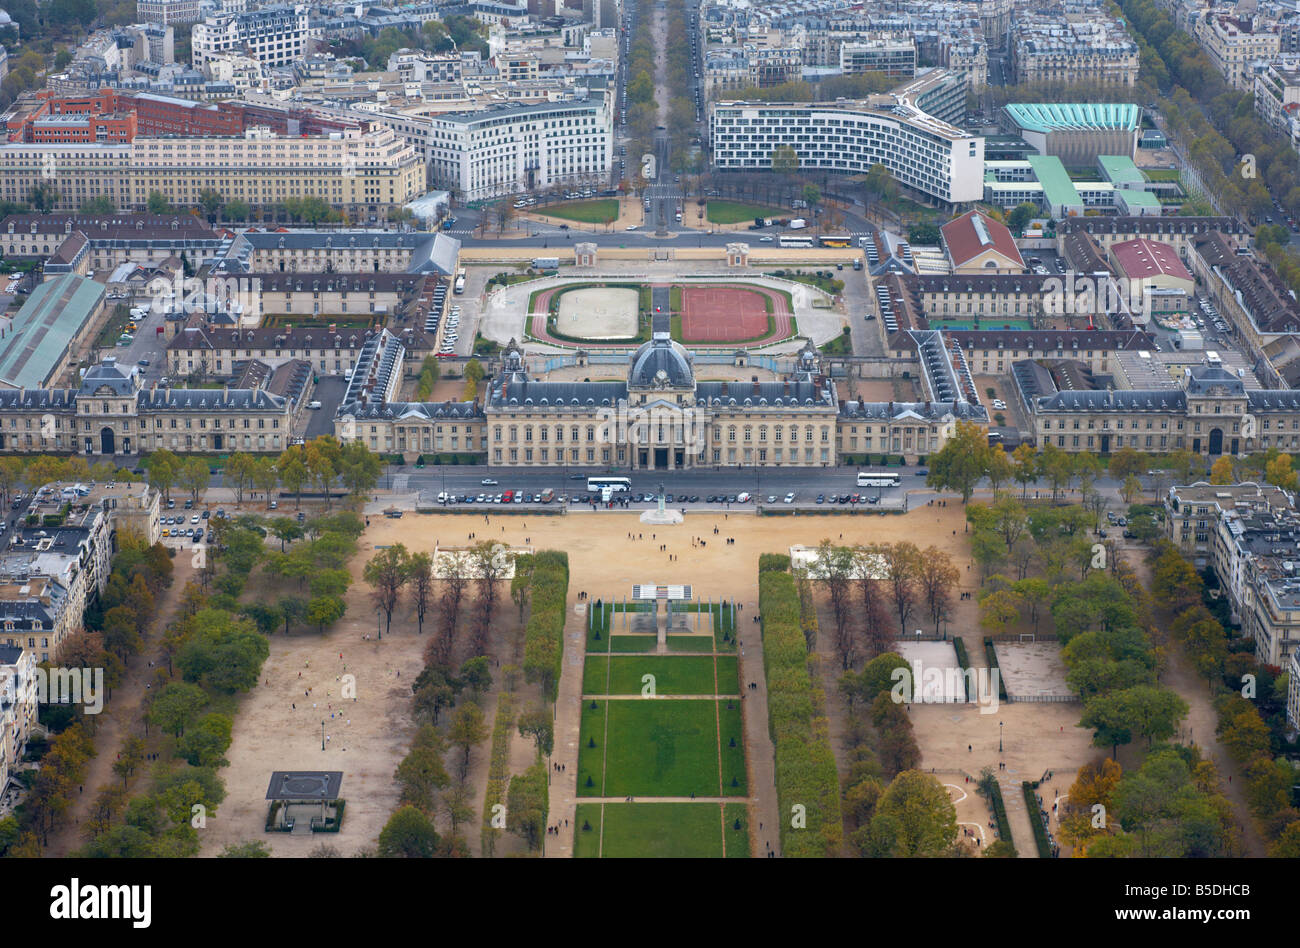 View towards the Ecole Militaire from the top of the Eiffel Tower Paris France Stock Photo